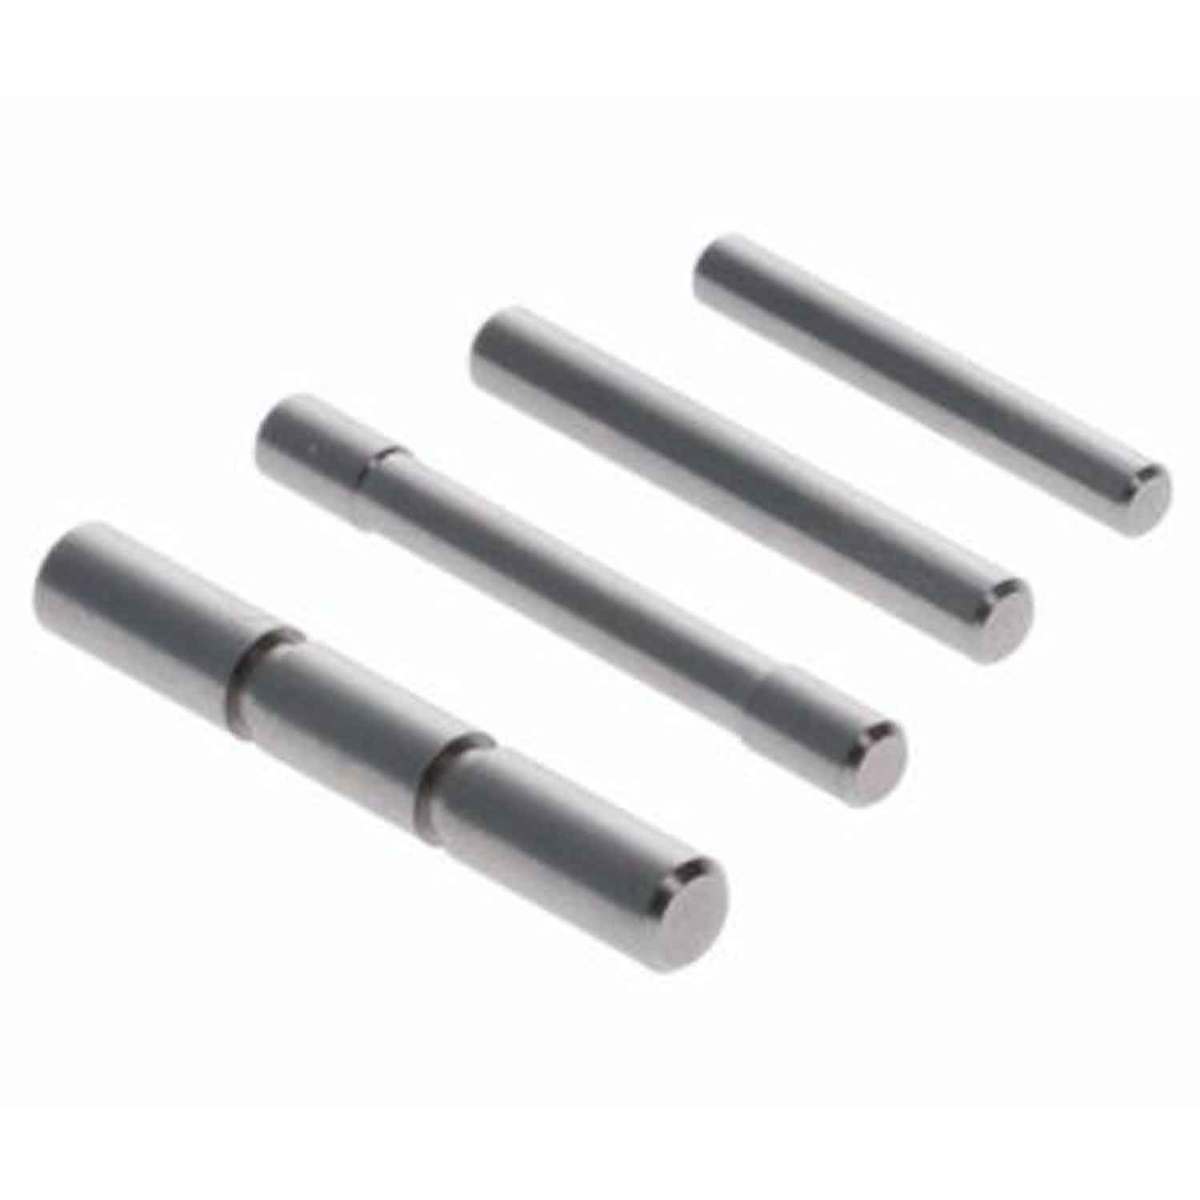 Stainless Steel Pin Kit, Best Glock Accessories